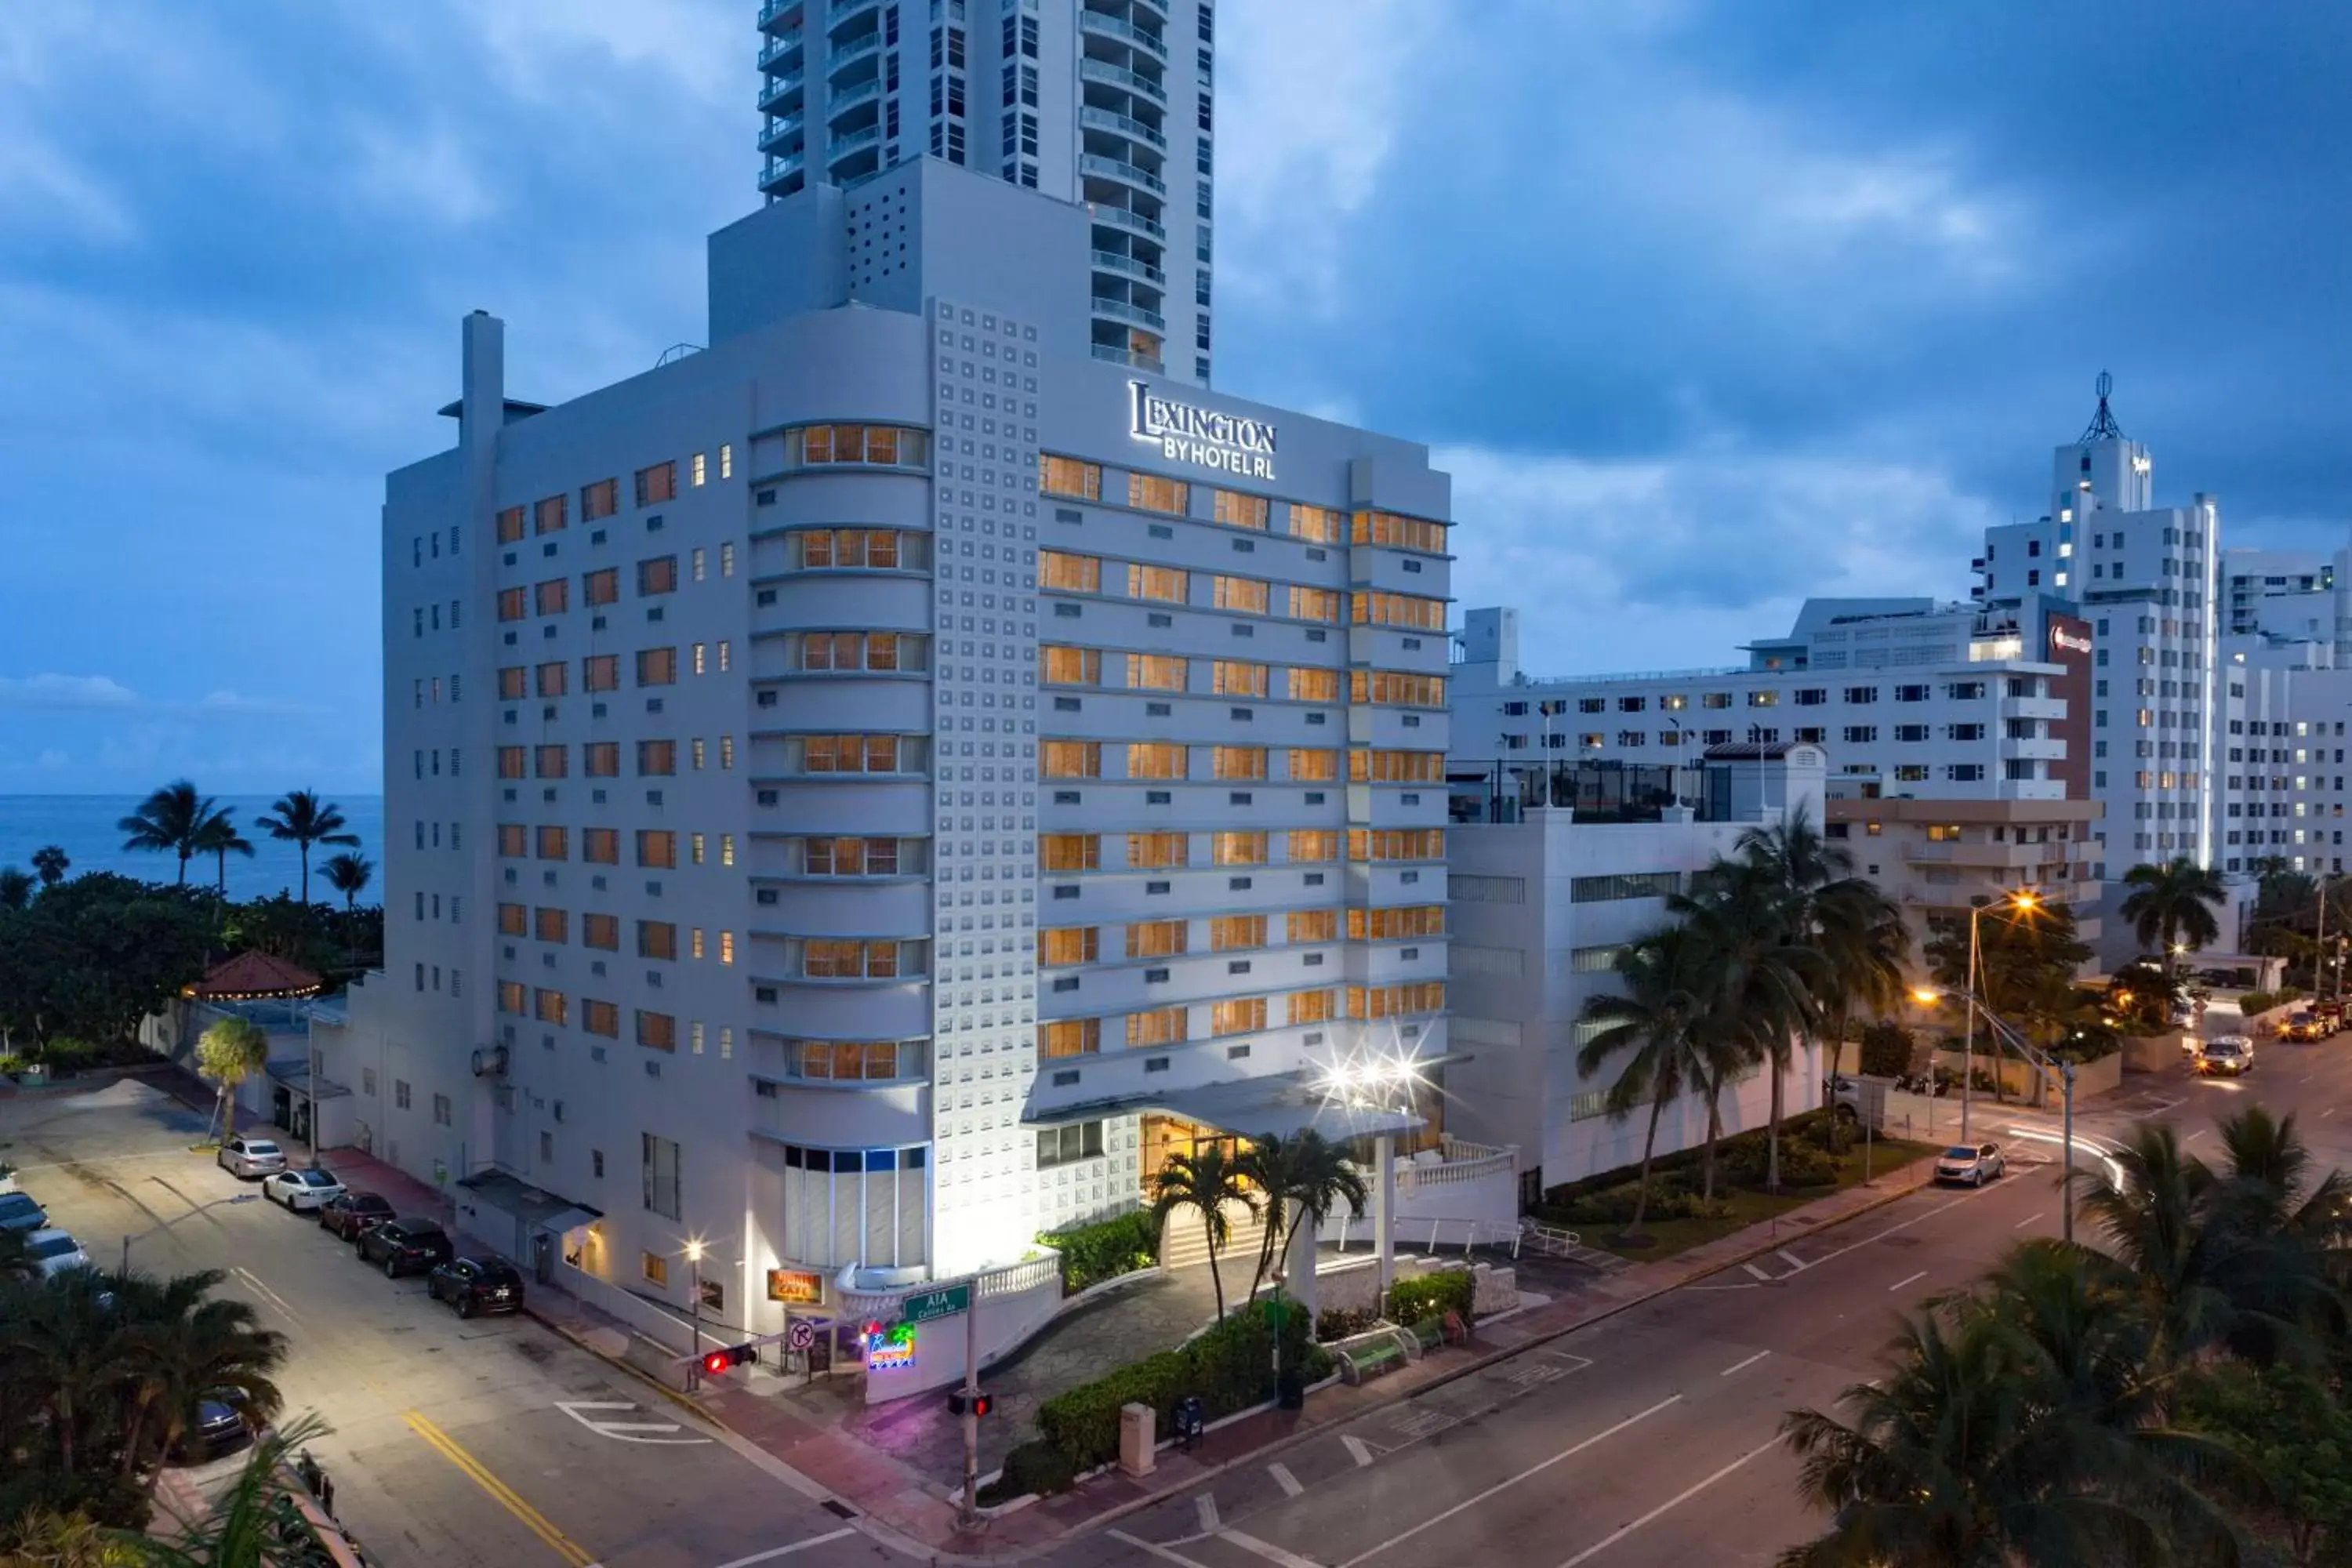 Property building in Lexington by Hotel RL Miami Beach